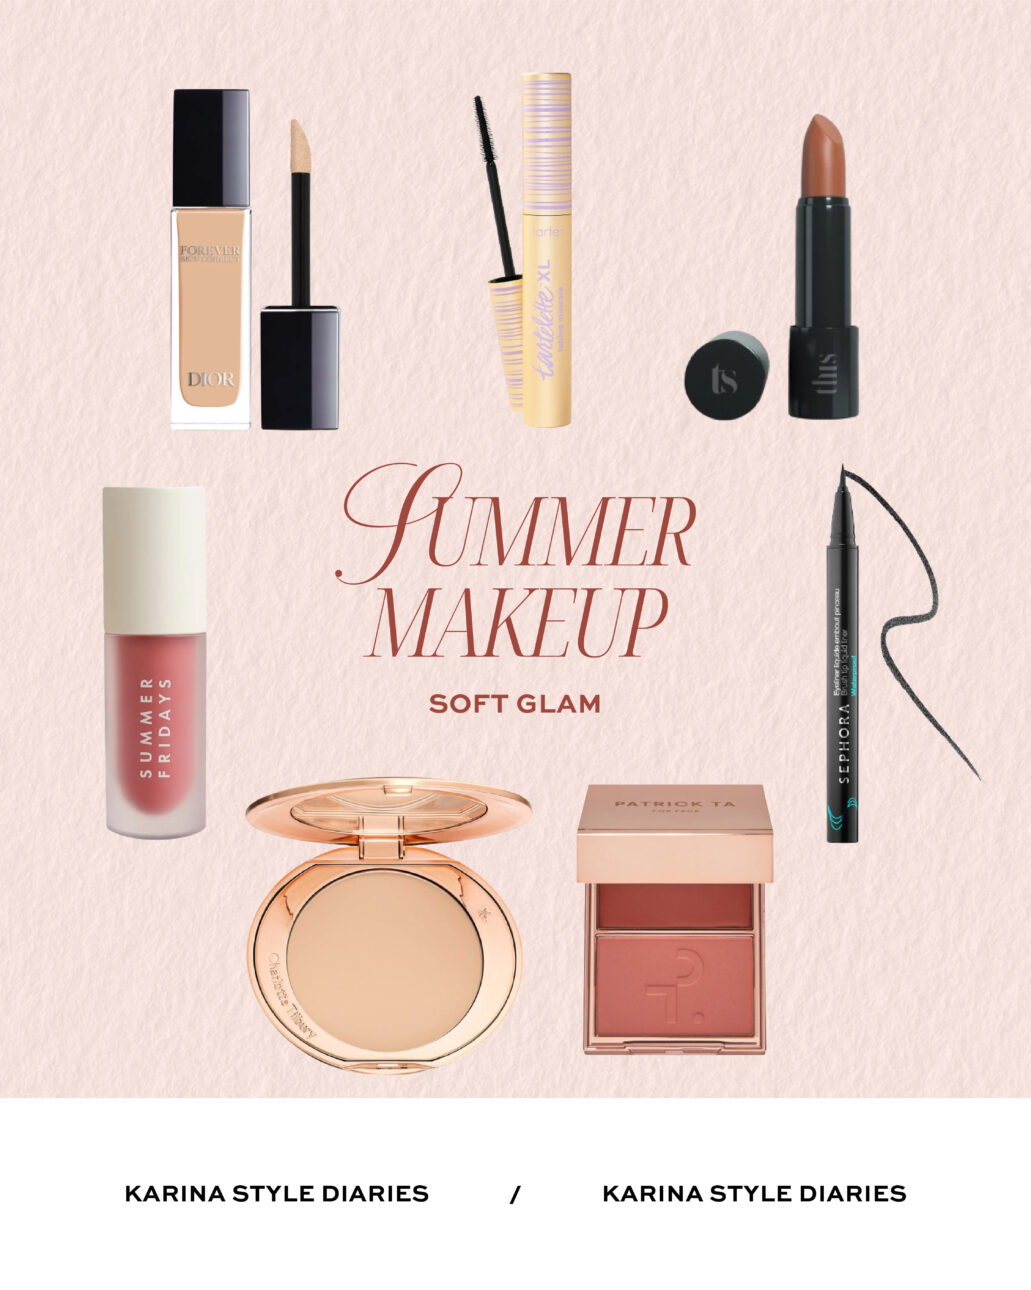 summer makeup products for a soft glam look